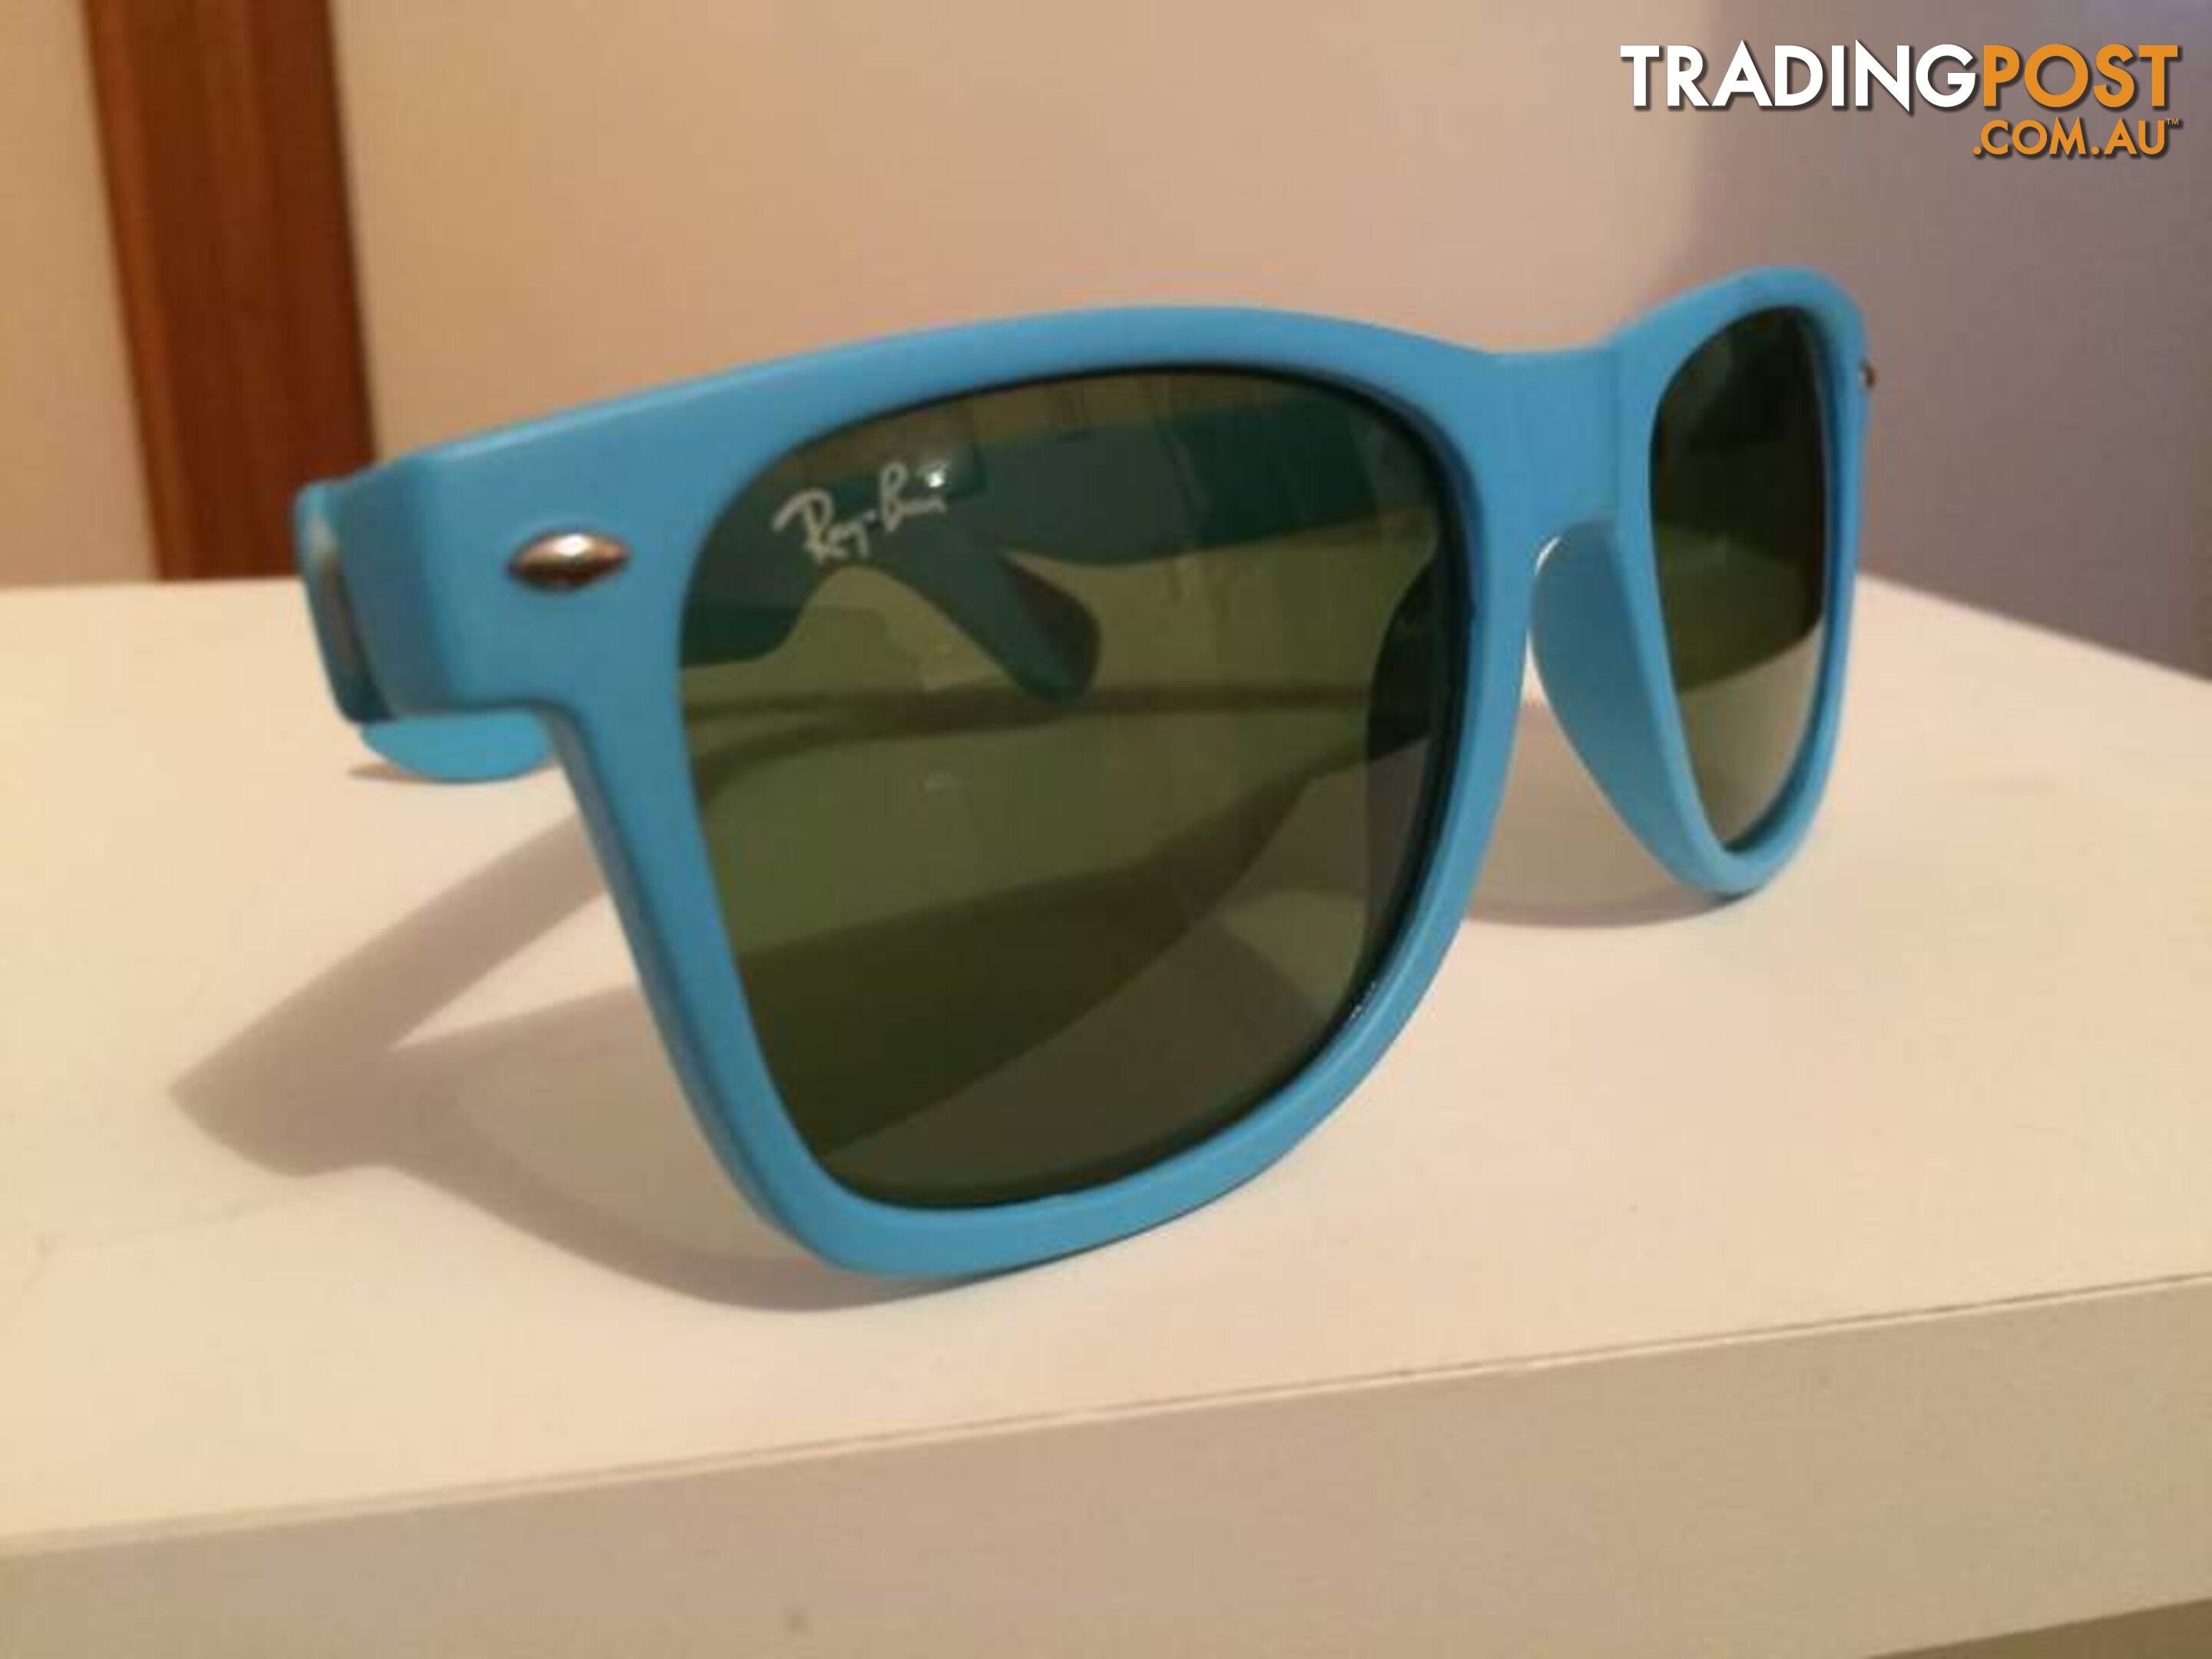 3 x UNISEX SUNGLASSES FOR $75 2X RAY BANS 1 X DIESEL